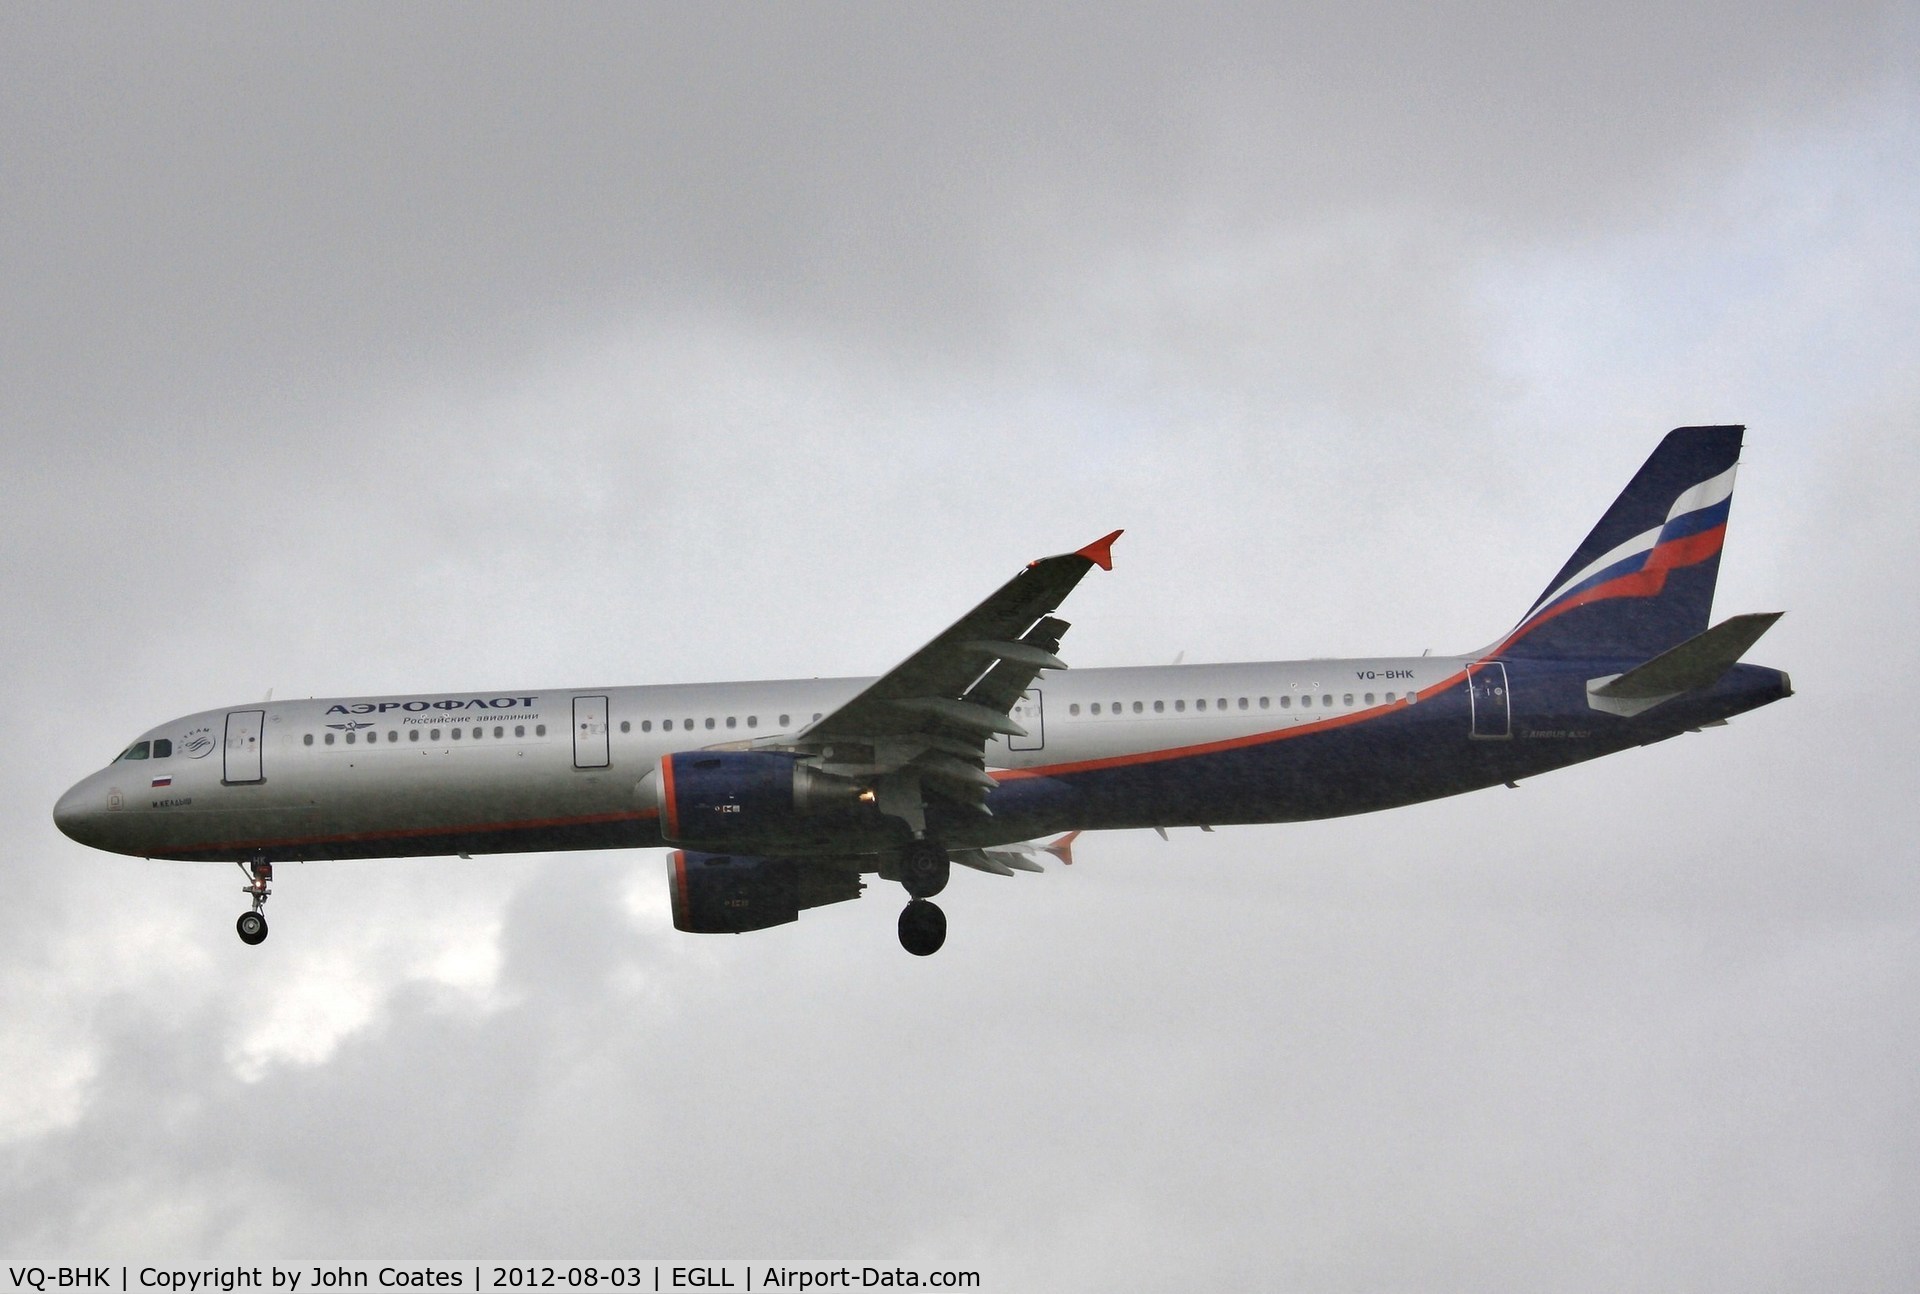 VQ-BHK, 2010 Airbus A321-211 C/N 4461, Bad weather finals to 27R